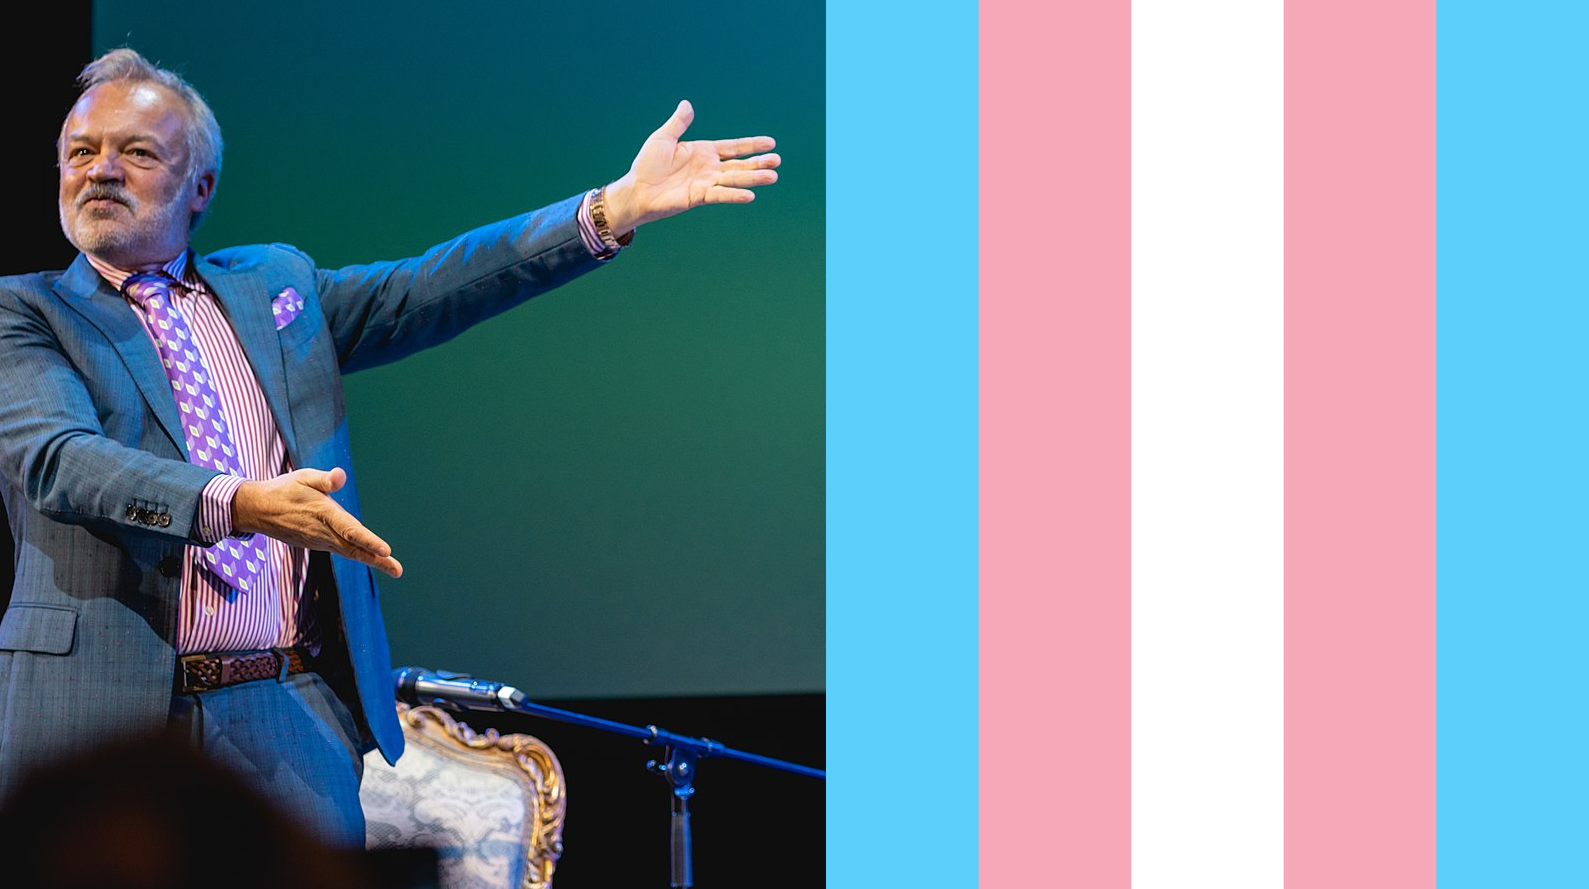 An image of Graham Norton gesturing towards a trans flag that I photoshopped in in place of Joan Collins who was originally on stage with him. This to represent the comments which have led to Graham Norton's Twitter being deactivated.